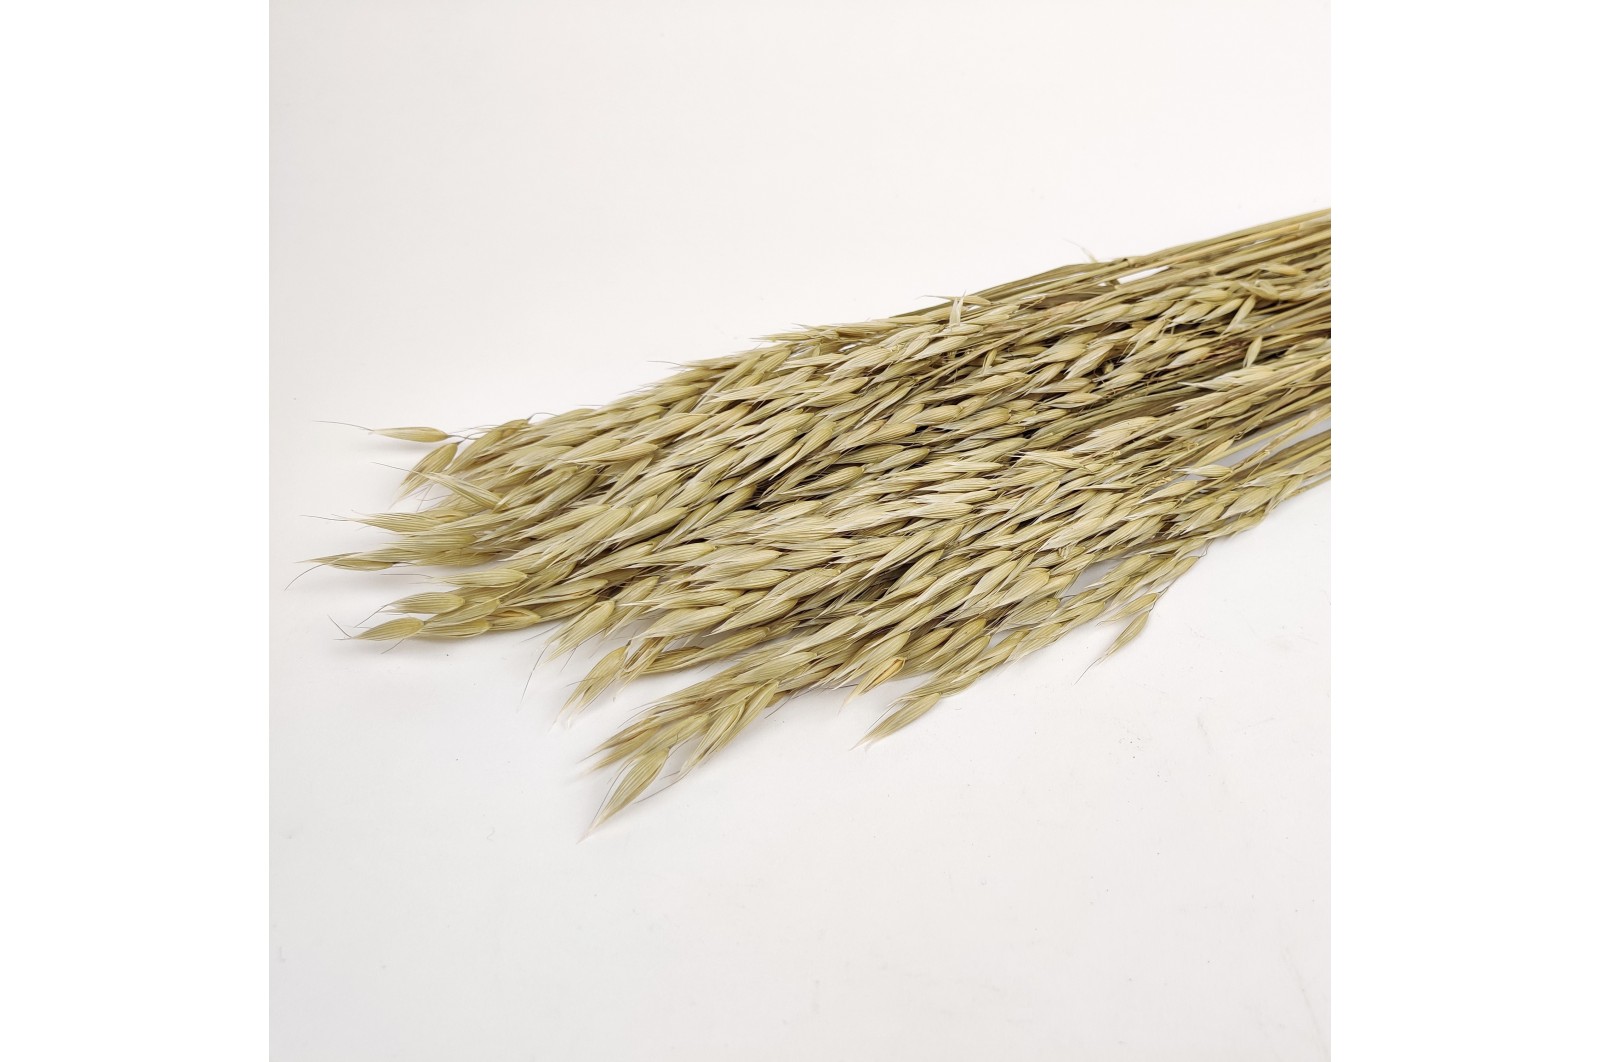 Dried cultivated oat natural